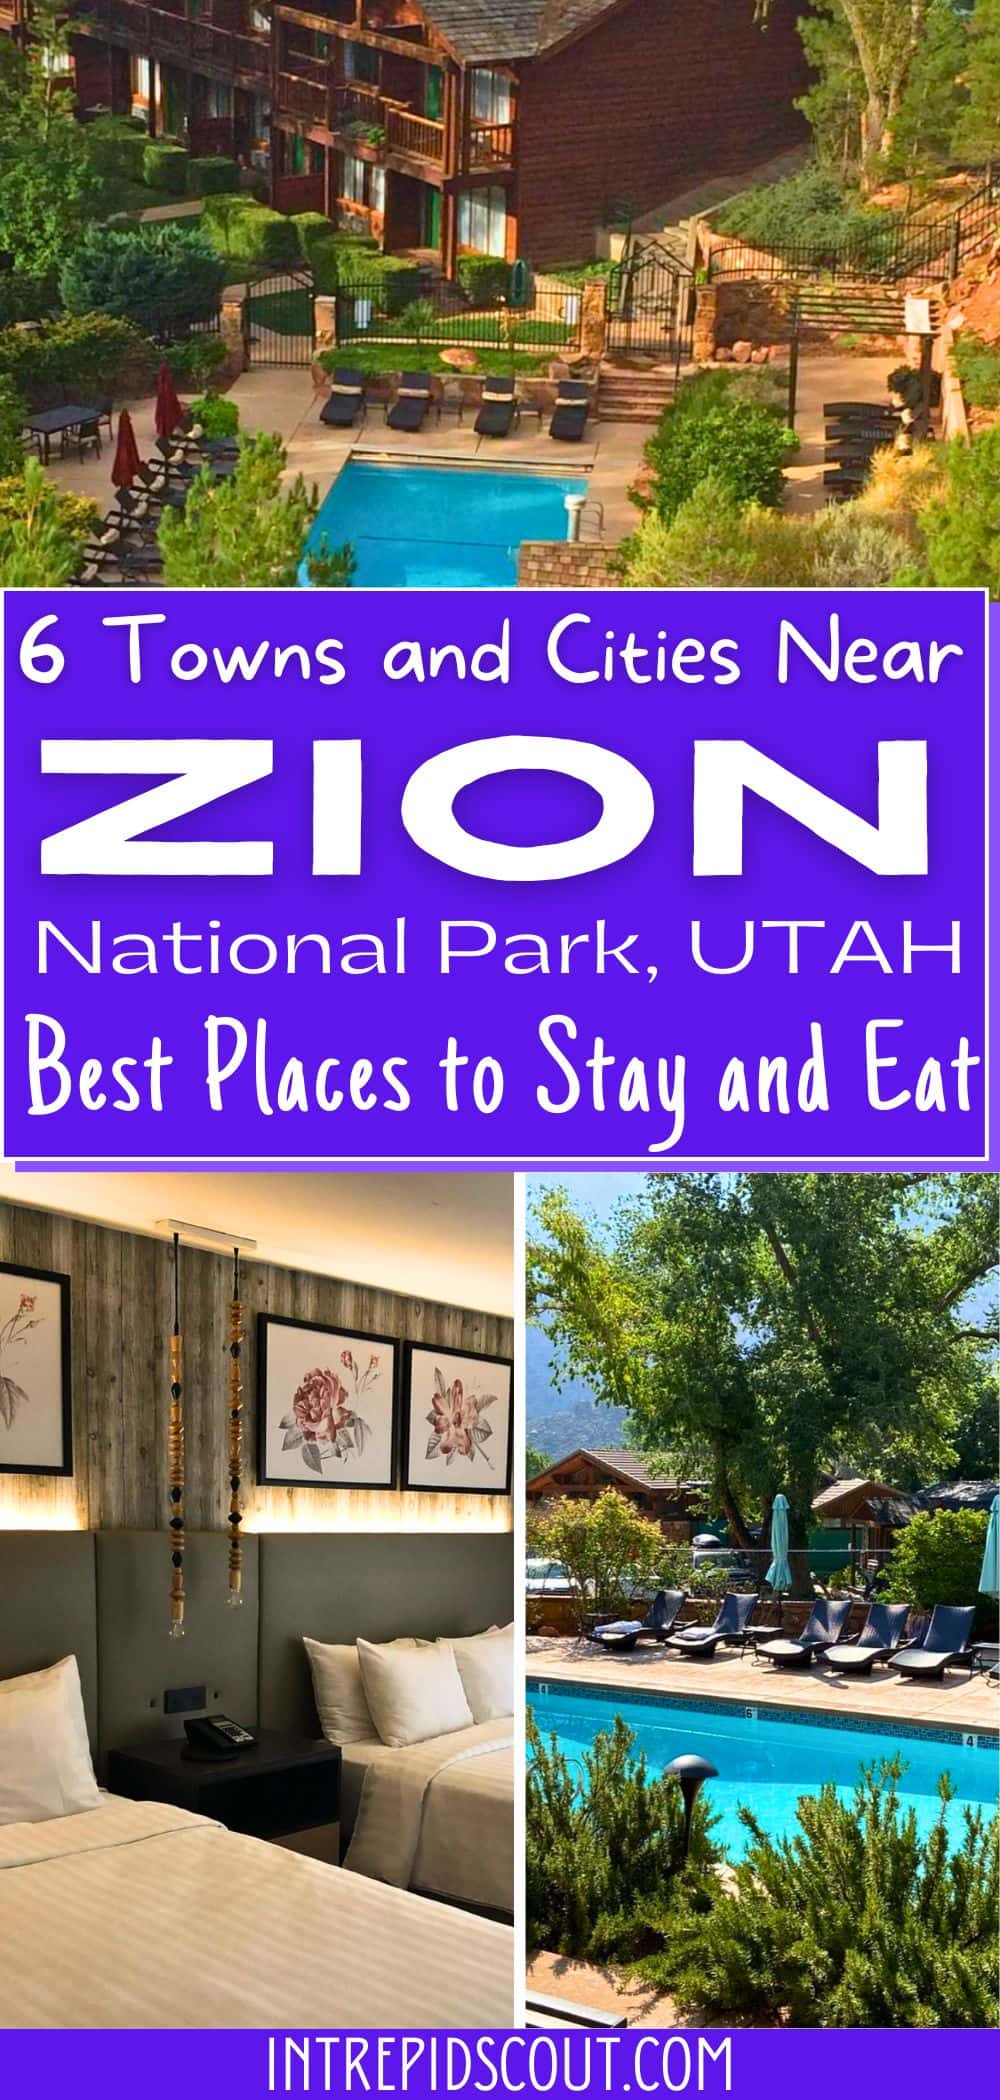 Towns and Cities Near Zion National Park